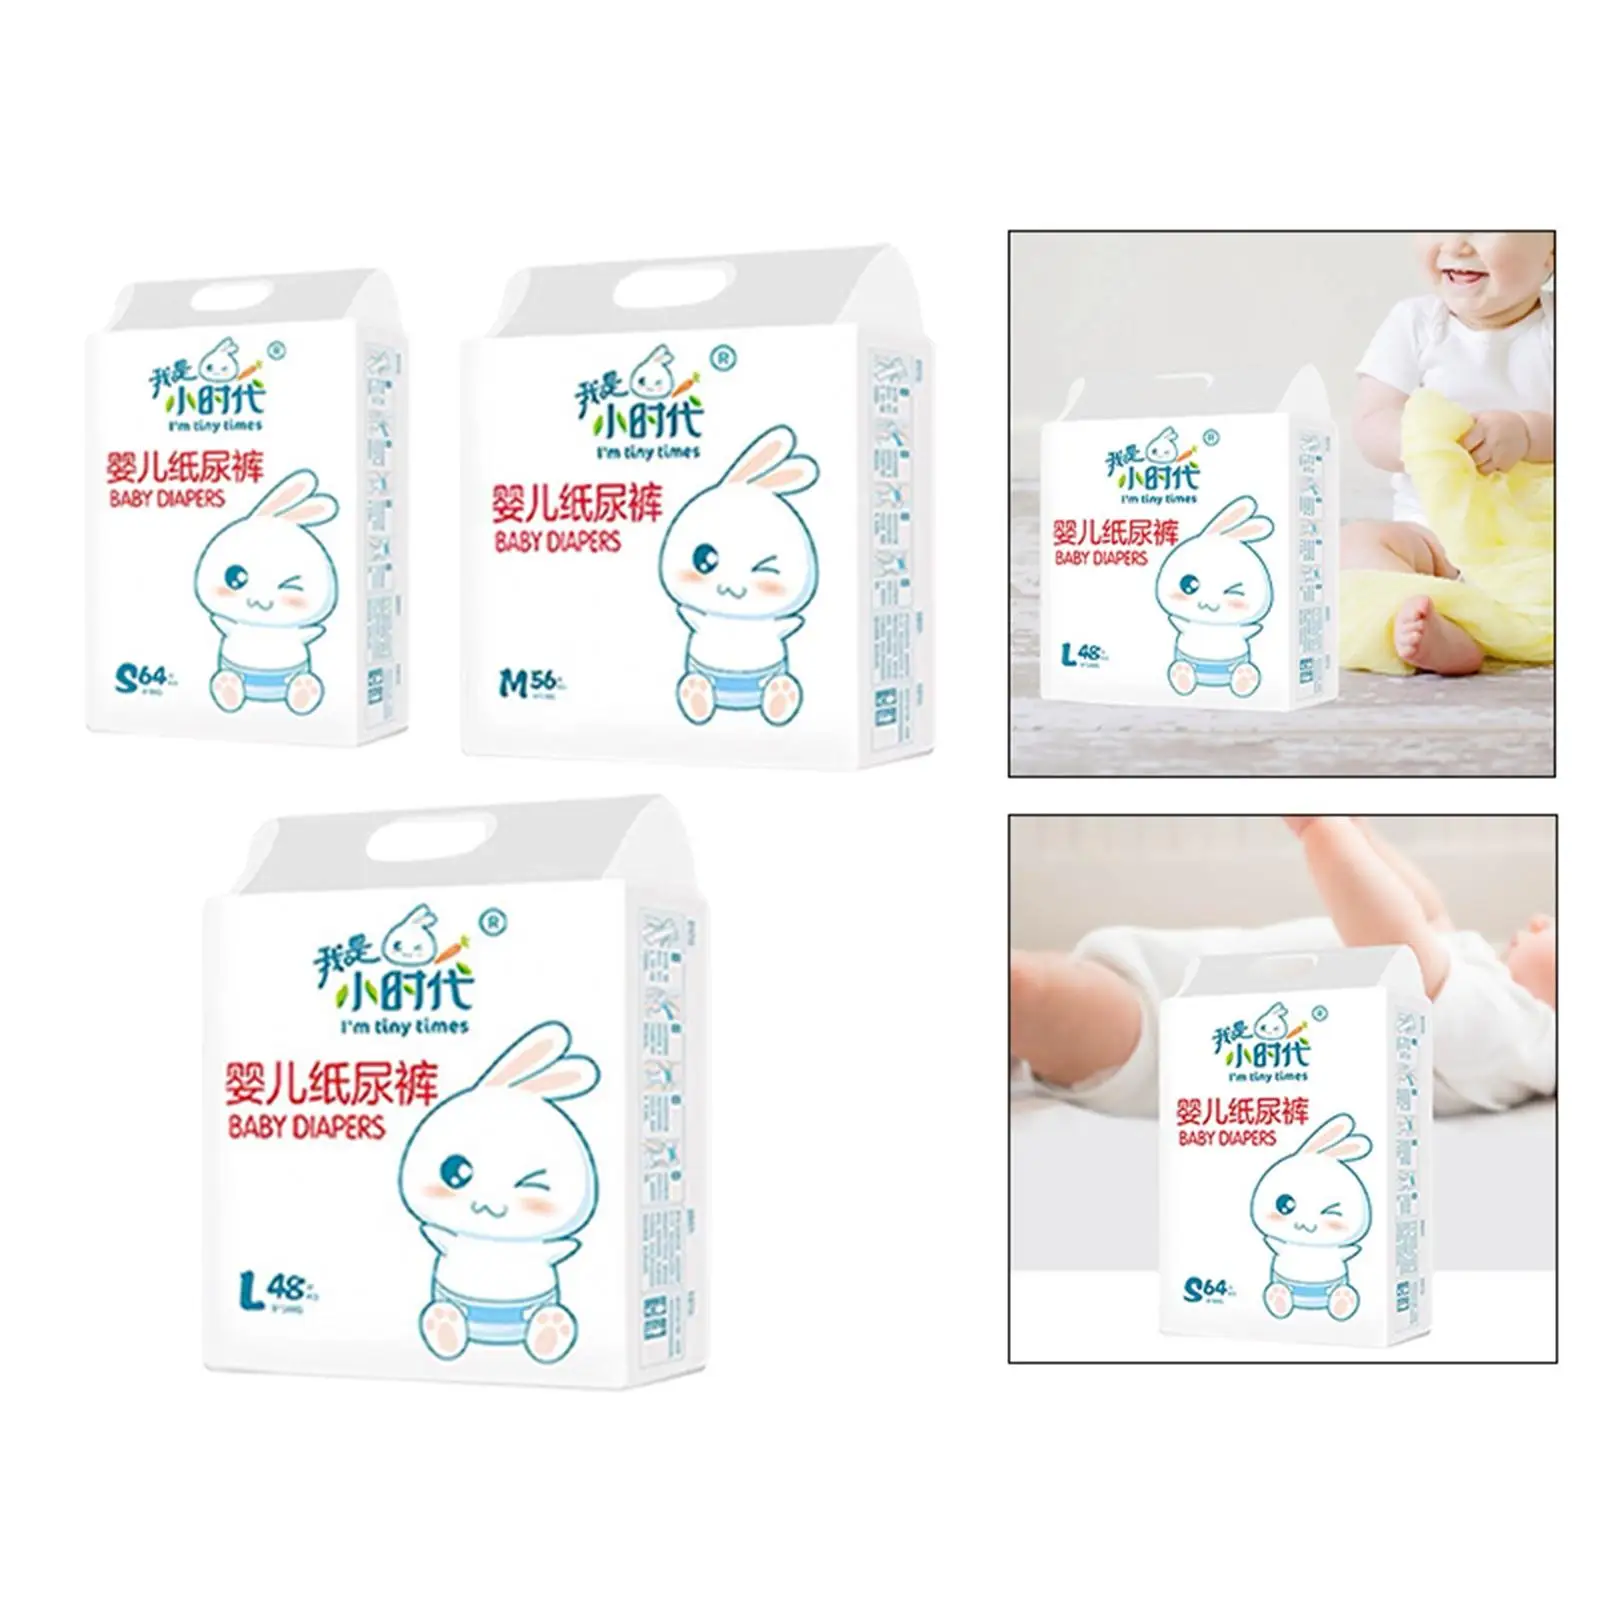 Baby Disposable Diapers Breathable Soft Comfortable Nappy Protect